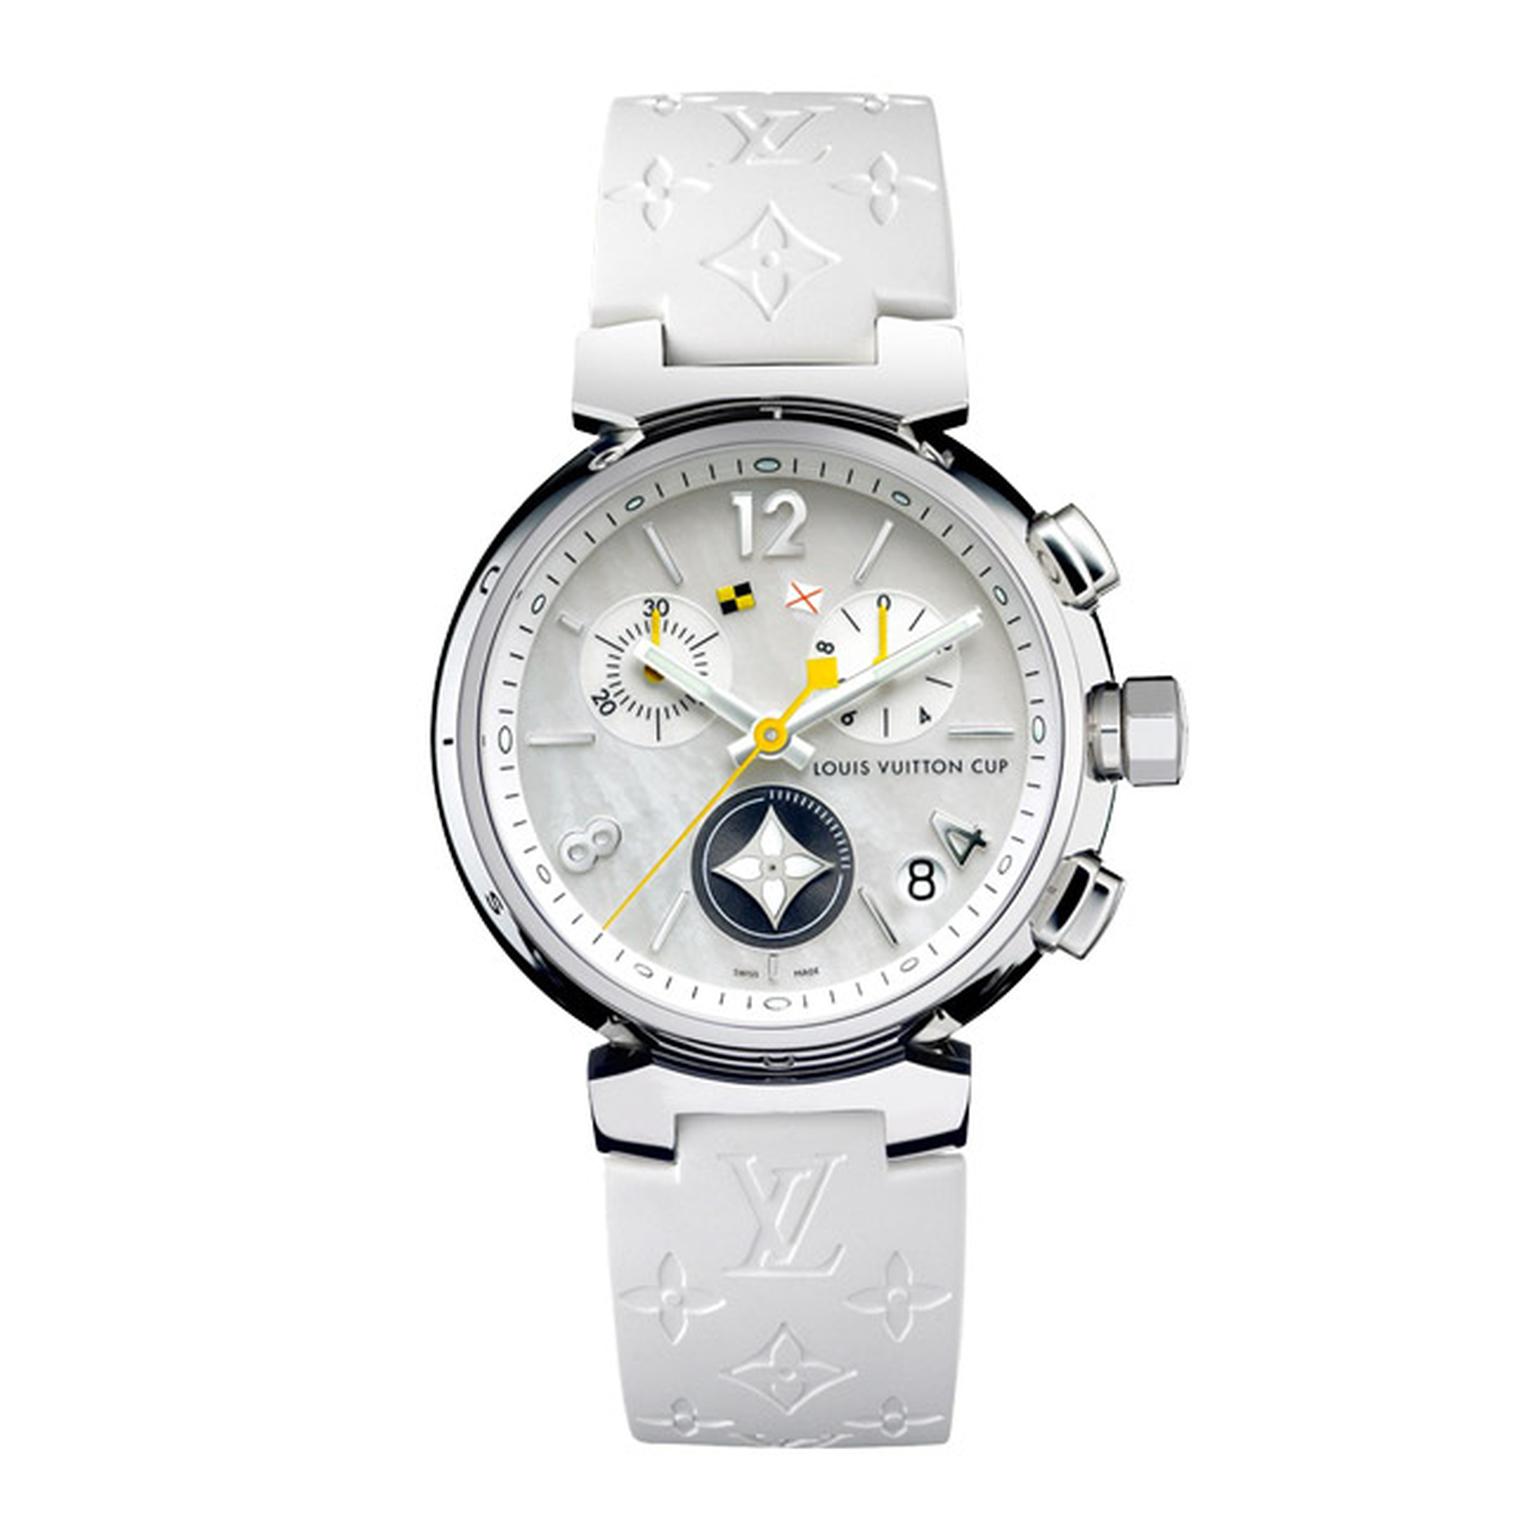 Louis-Vuitton-Tamour-lovely-Cup-Chrono-Main